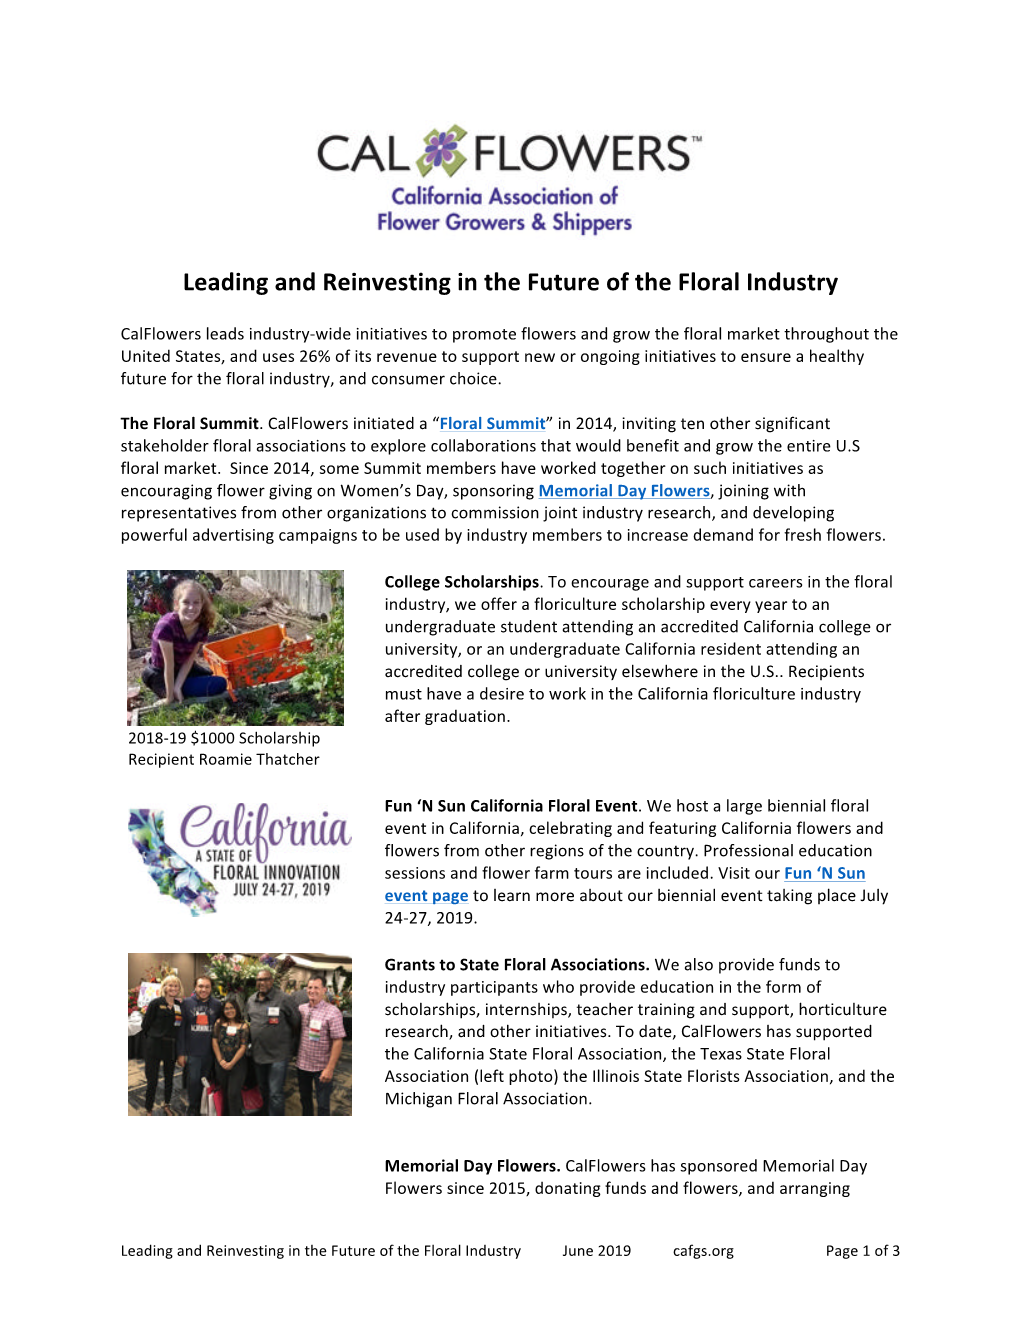 Leading and Reinvesting in the Floral Industry-5-26-19